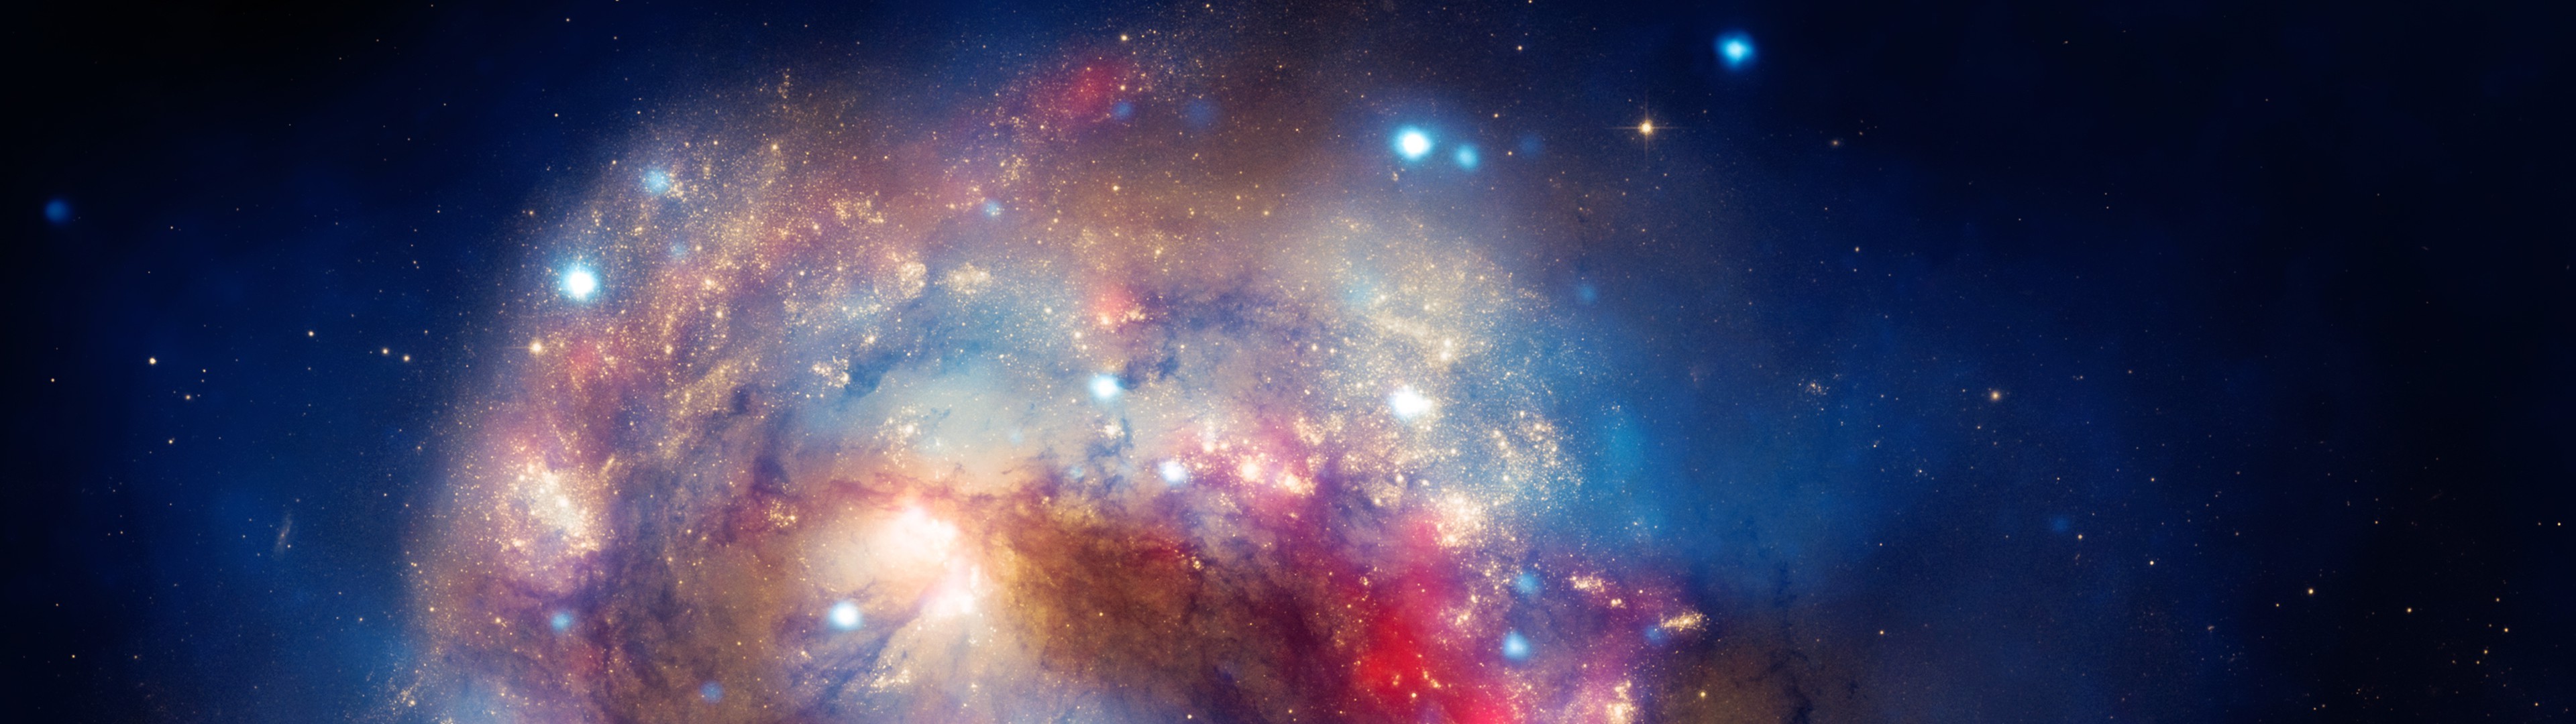 multiple Display, Stars, Space, Colorful, Galaxy, Universe Wallpaper